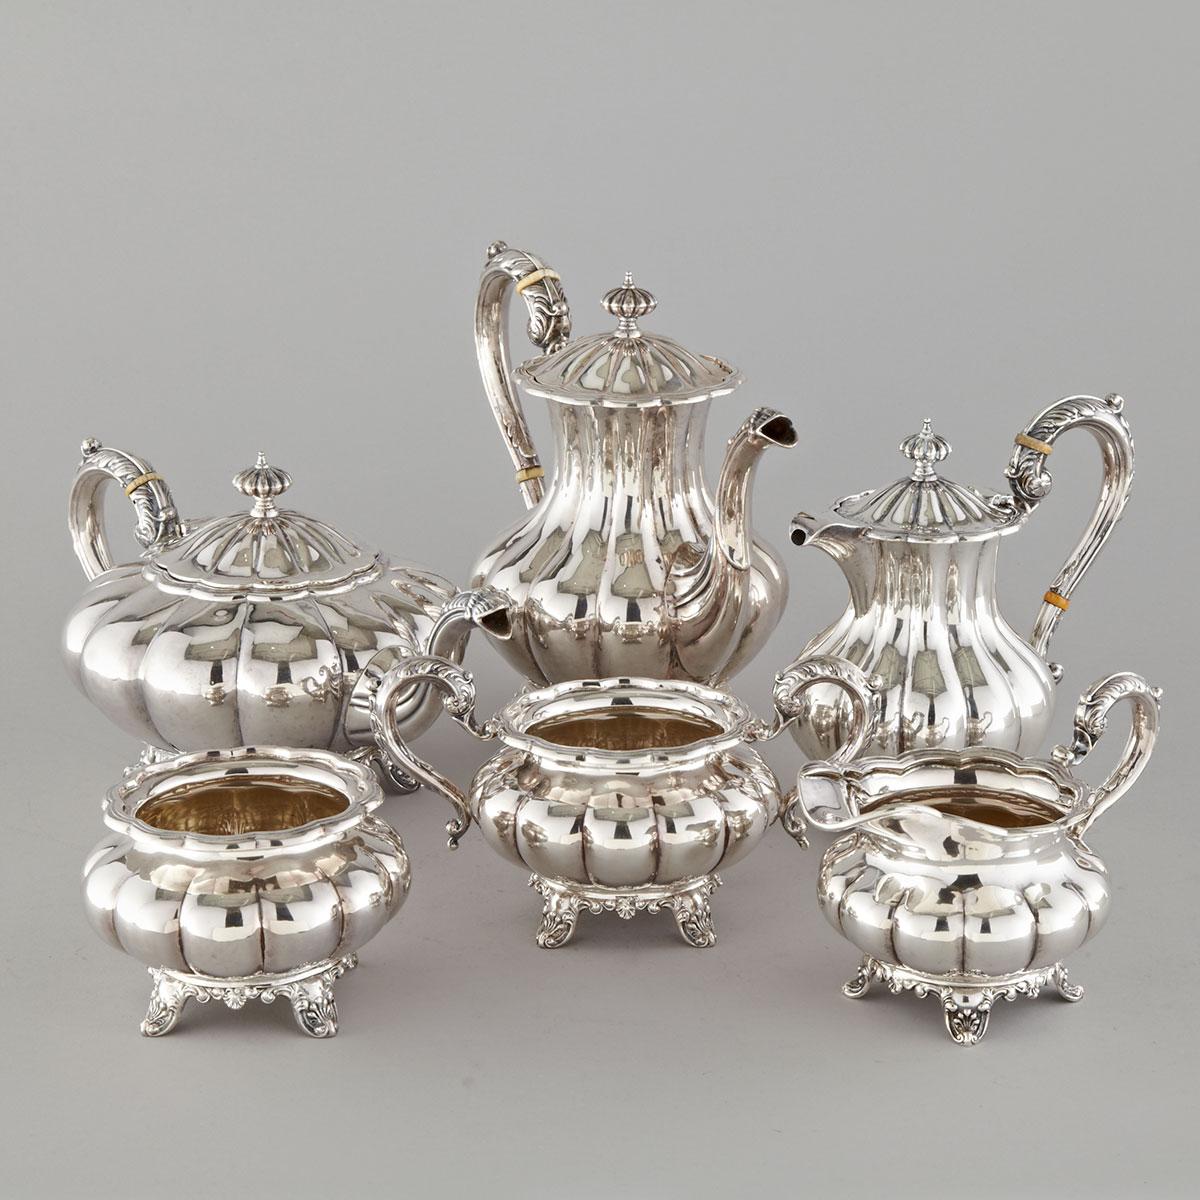 Canadian SIlver Tea and Coffee Service, Henry Birks & Sons, Montreal, Que., 1945/46